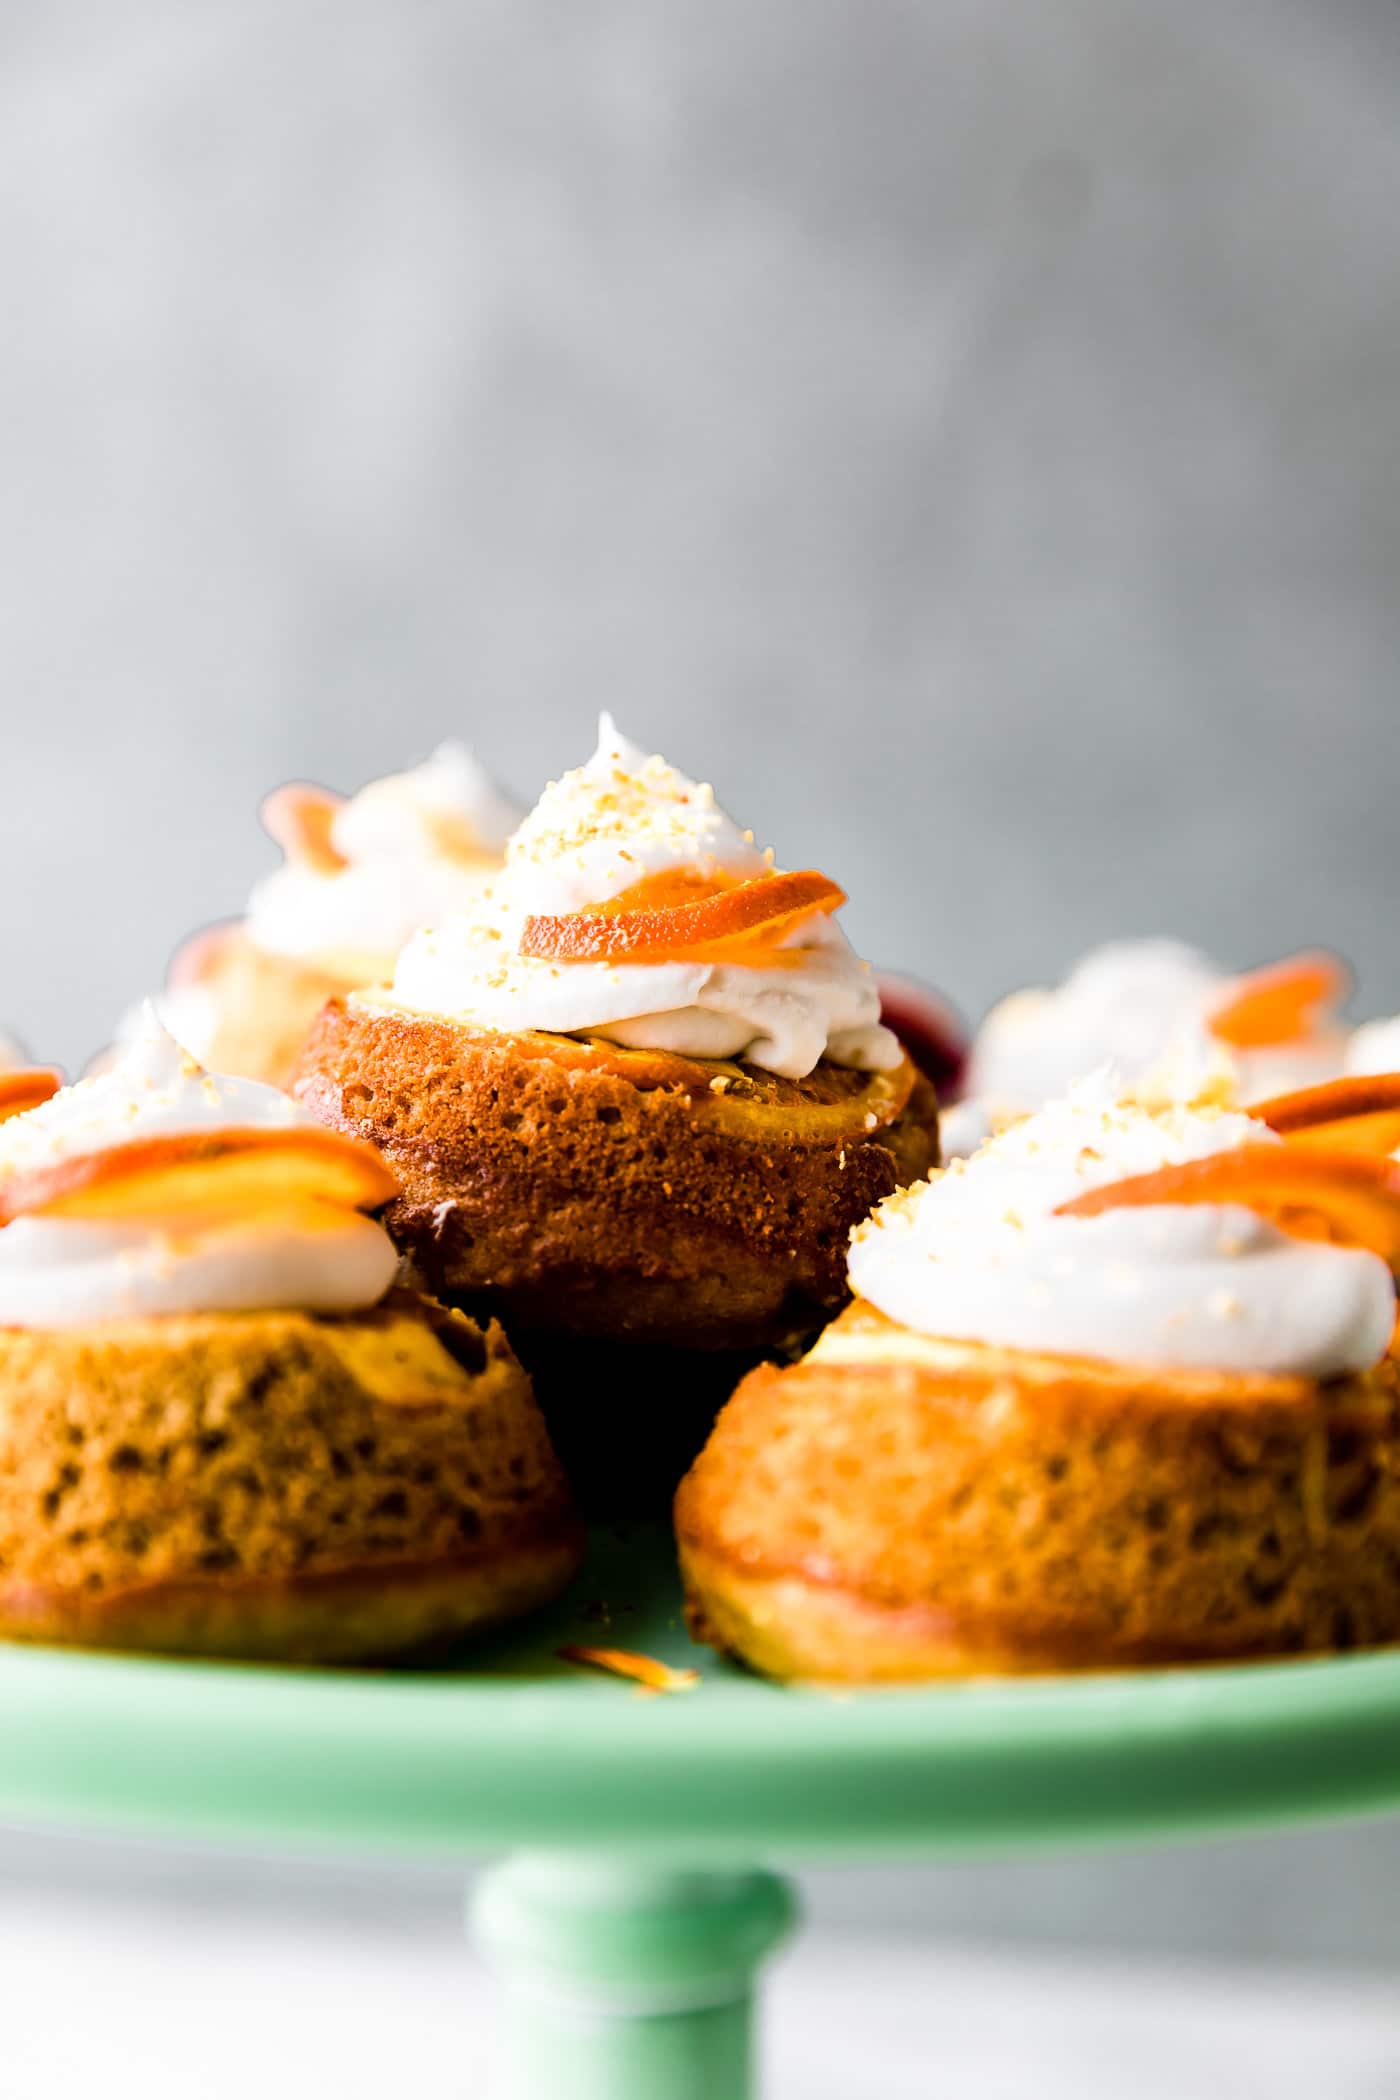 Mini upside down cakes with whipped cream and orange slices.